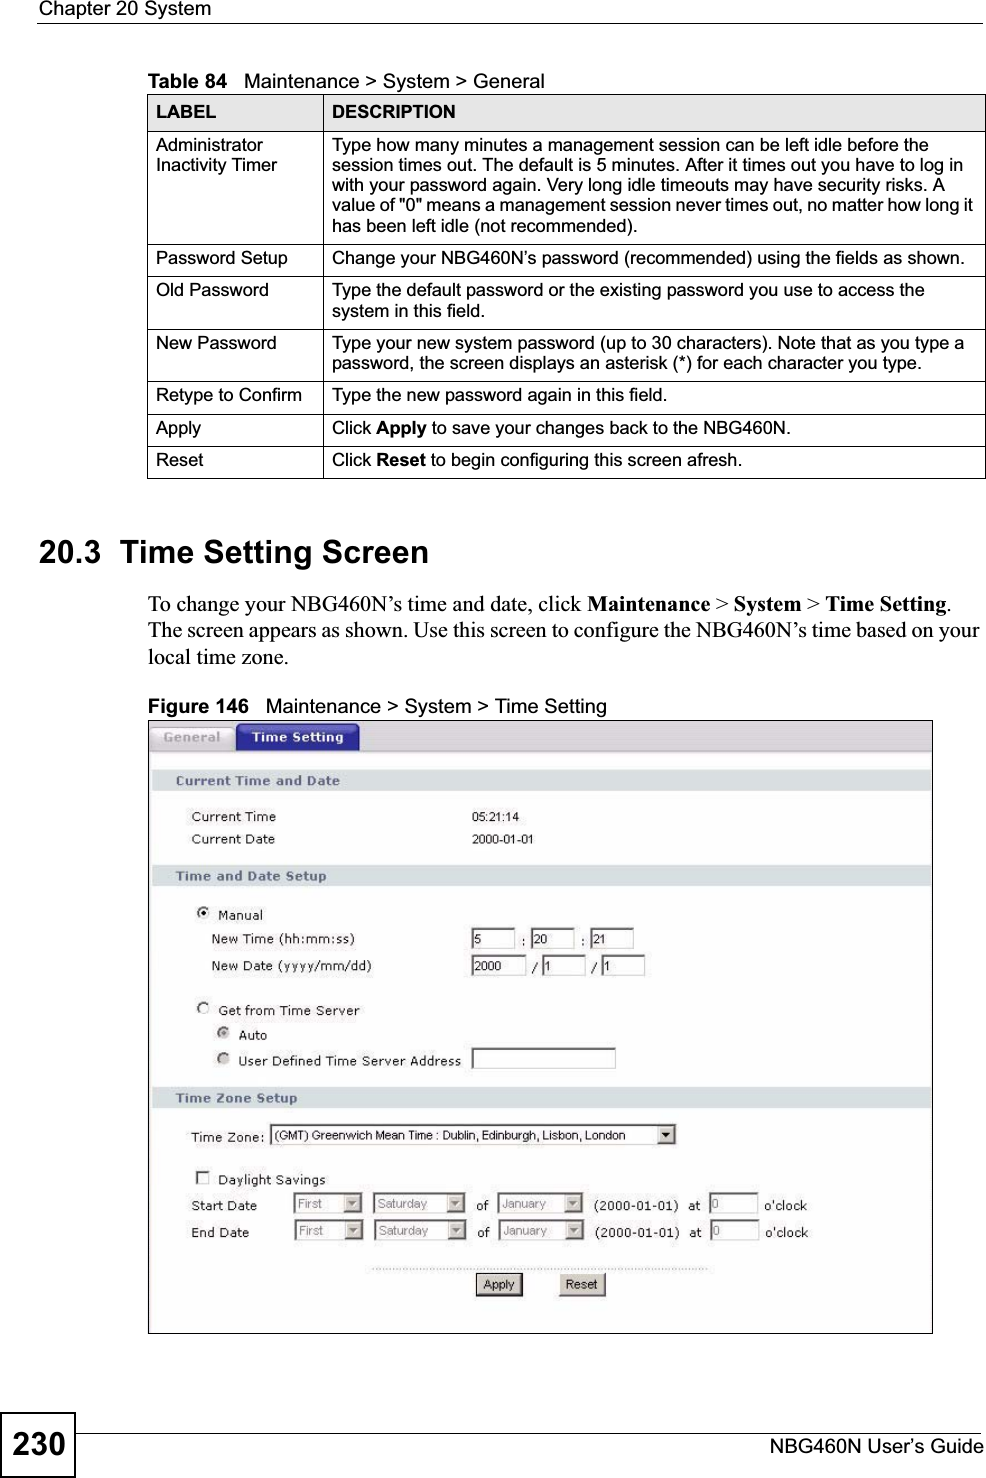 Chapter 20 SystemNBG460N User’s Guide23020.3  Time Setting ScreenTo change your NBG460N’s time and date, click Maintenance &gt; System &gt; Time Setting.The screen appears as shown. Use this screen to configure the NBG460N’s time based on your local time zone.Figure 146   Maintenance &gt; System &gt; Time Setting Administrator Inactivity TimerType how many minutes a management session can be left idle before the session times out. The default is 5 minutes. After it times out you have to log in with your password again. Very long idle timeouts may have security risks. A value of &quot;0&quot; means a management session never times out, no matter how long it has been left idle (not recommended).Password Setup Change your NBG460N’s password (recommended) using the fields as shown.Old Password Type the default password or the existing password you use to access the system in this field.New Password Type your new system password (up to 30 characters). Note that as you type a password, the screen displays an asterisk (*) for each character you type.Retype to Confirm Type the new password again in this field.Apply Click Apply to save your changes back to the NBG460N.Reset Click Reset to begin configuring this screen afresh.Table 84   Maintenance &gt; System &gt; GeneralLABEL DESCRIPTION